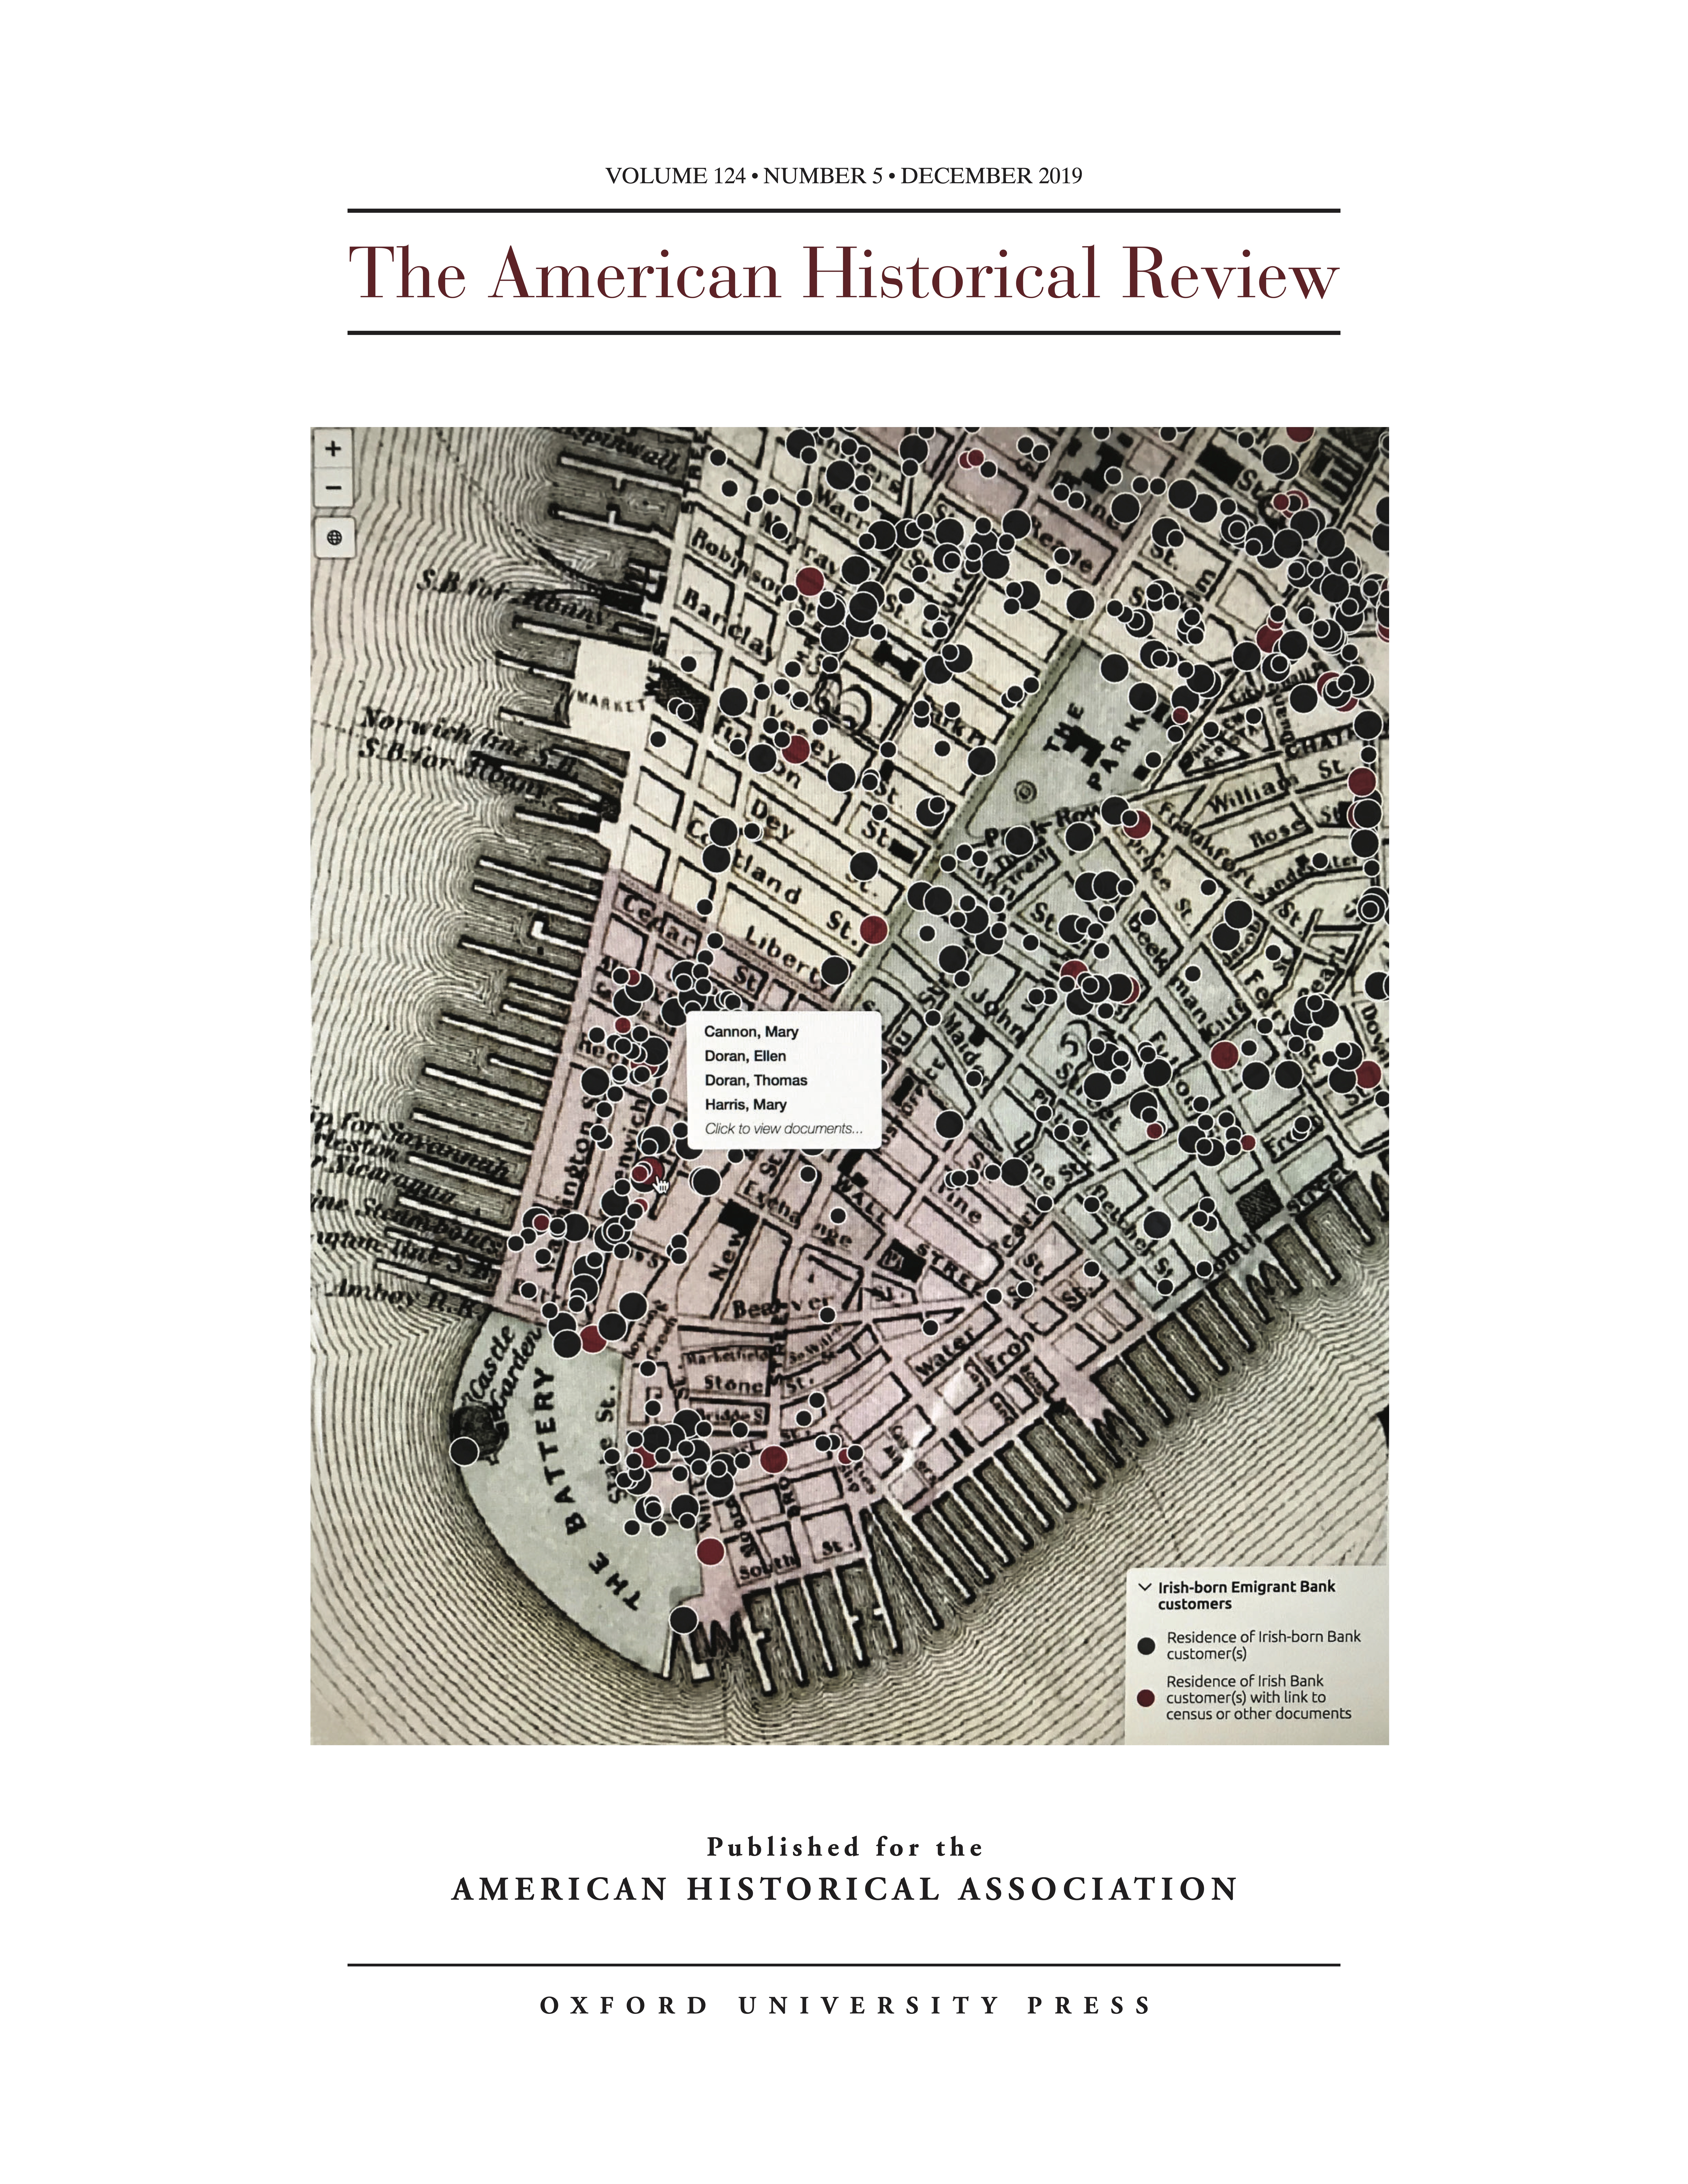 Cover of the December 2019 American Historical Review